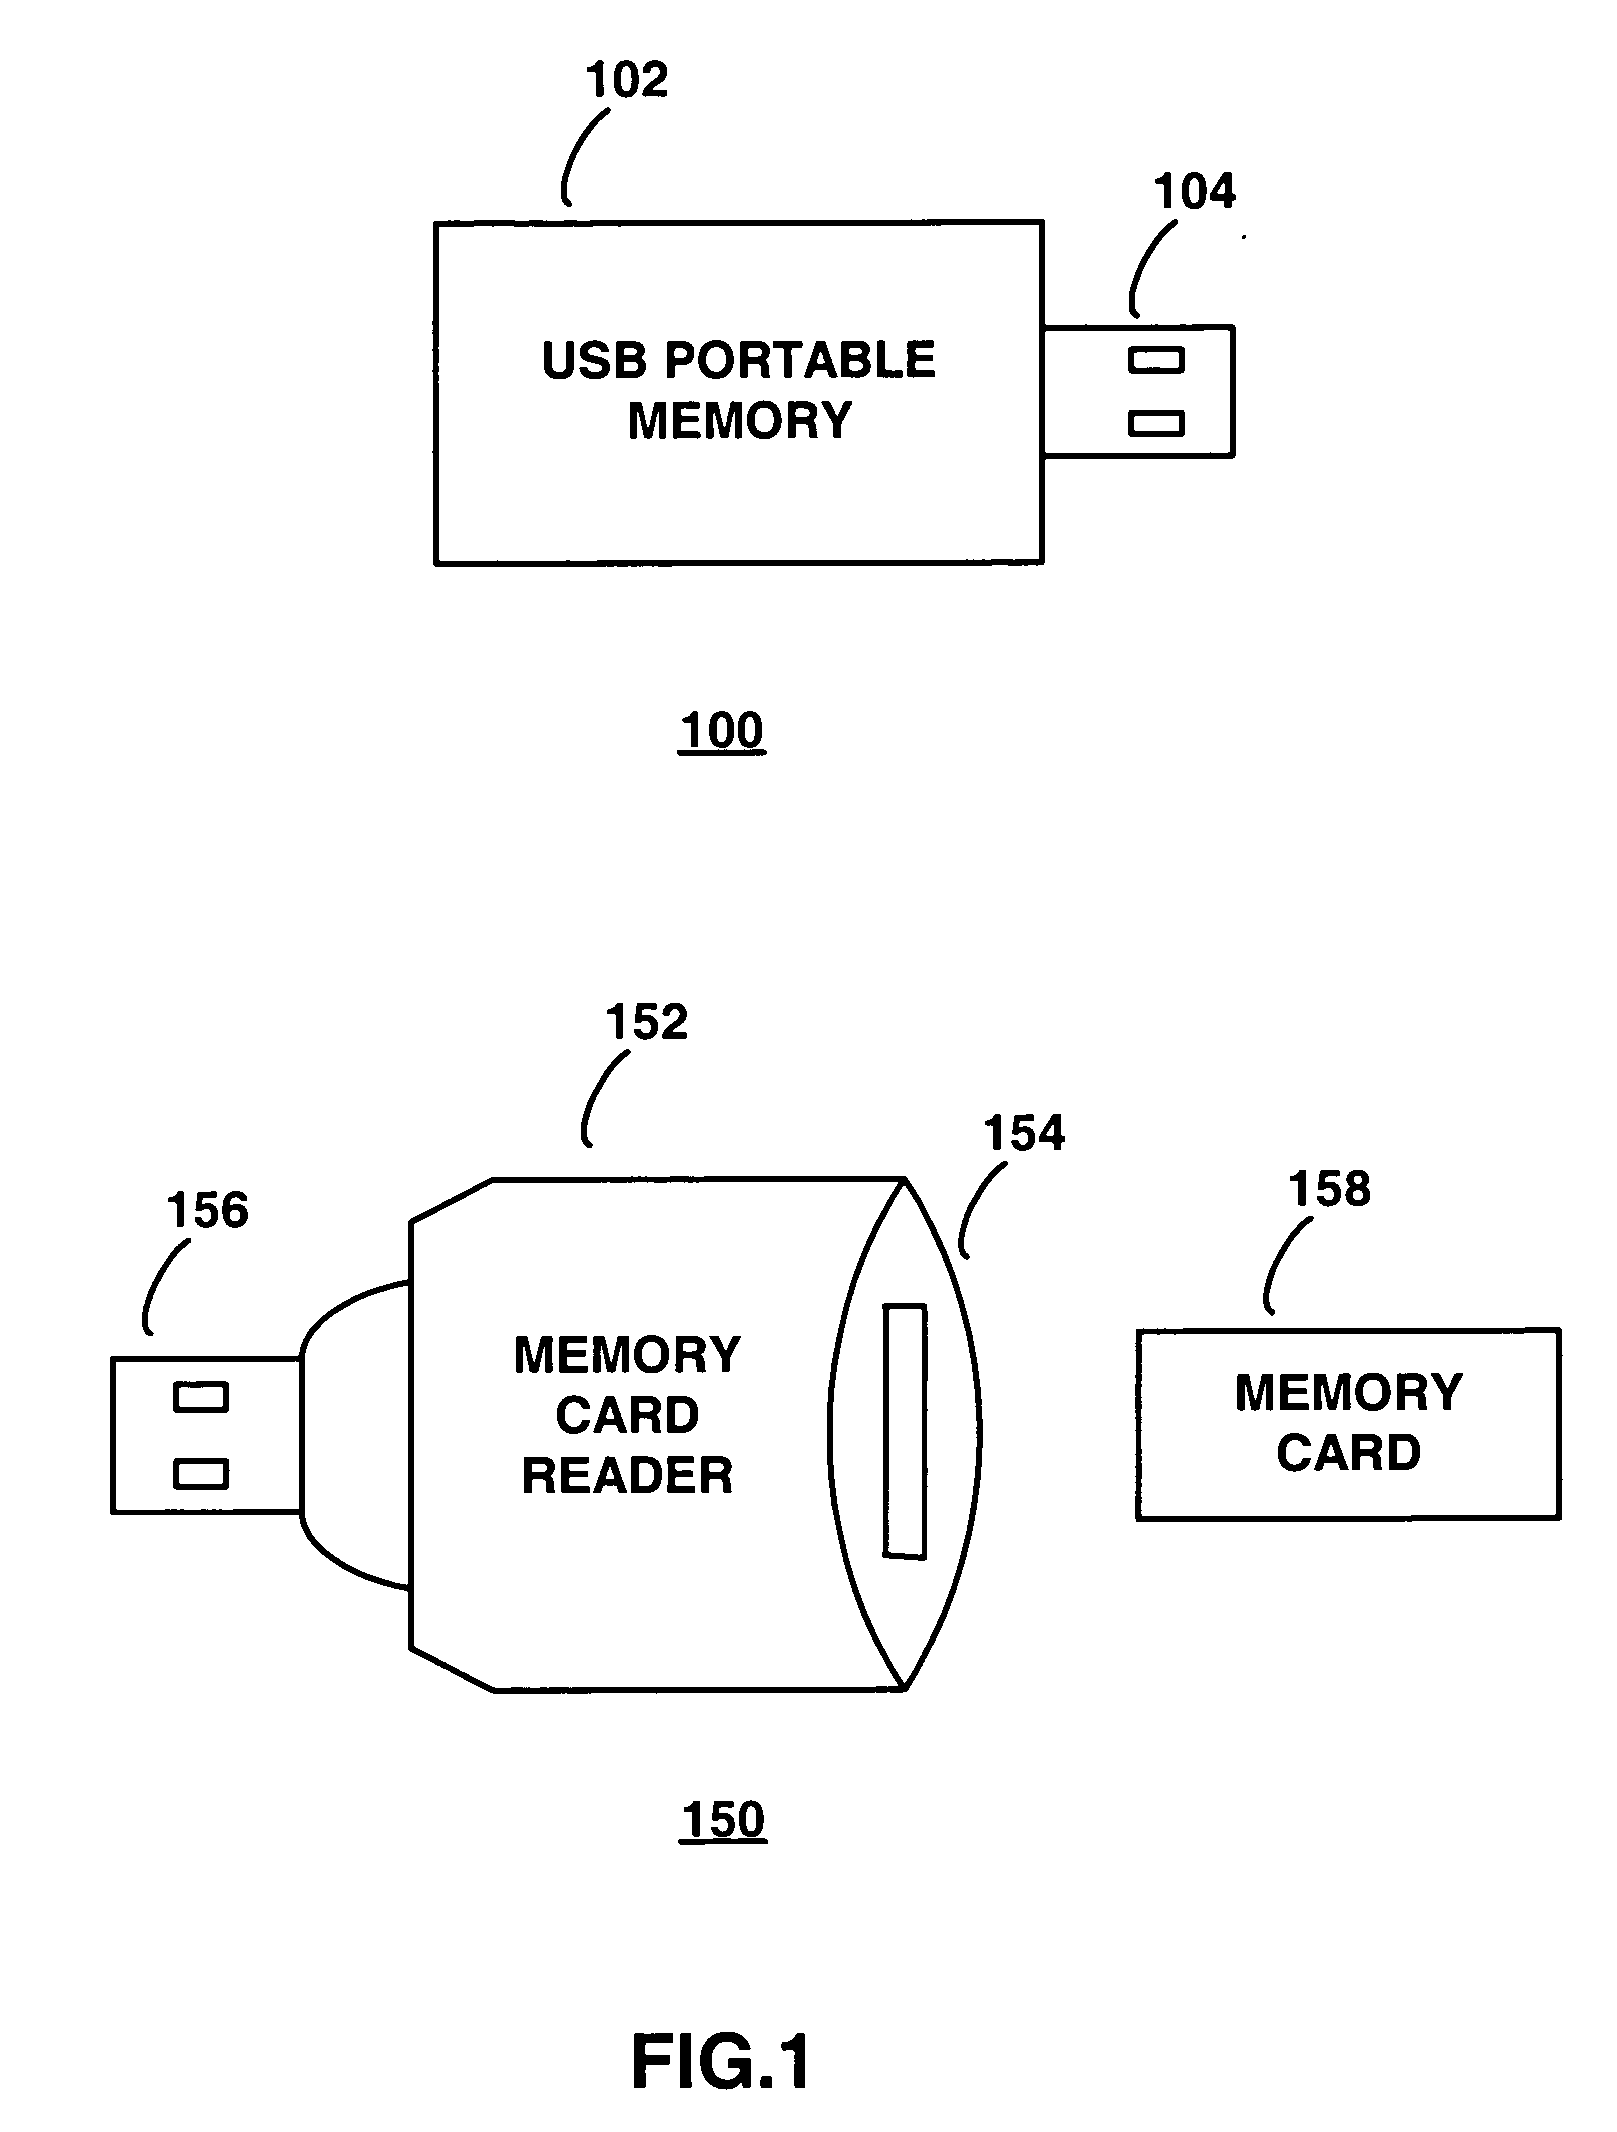 Participating in an incentive program using a portable memory device